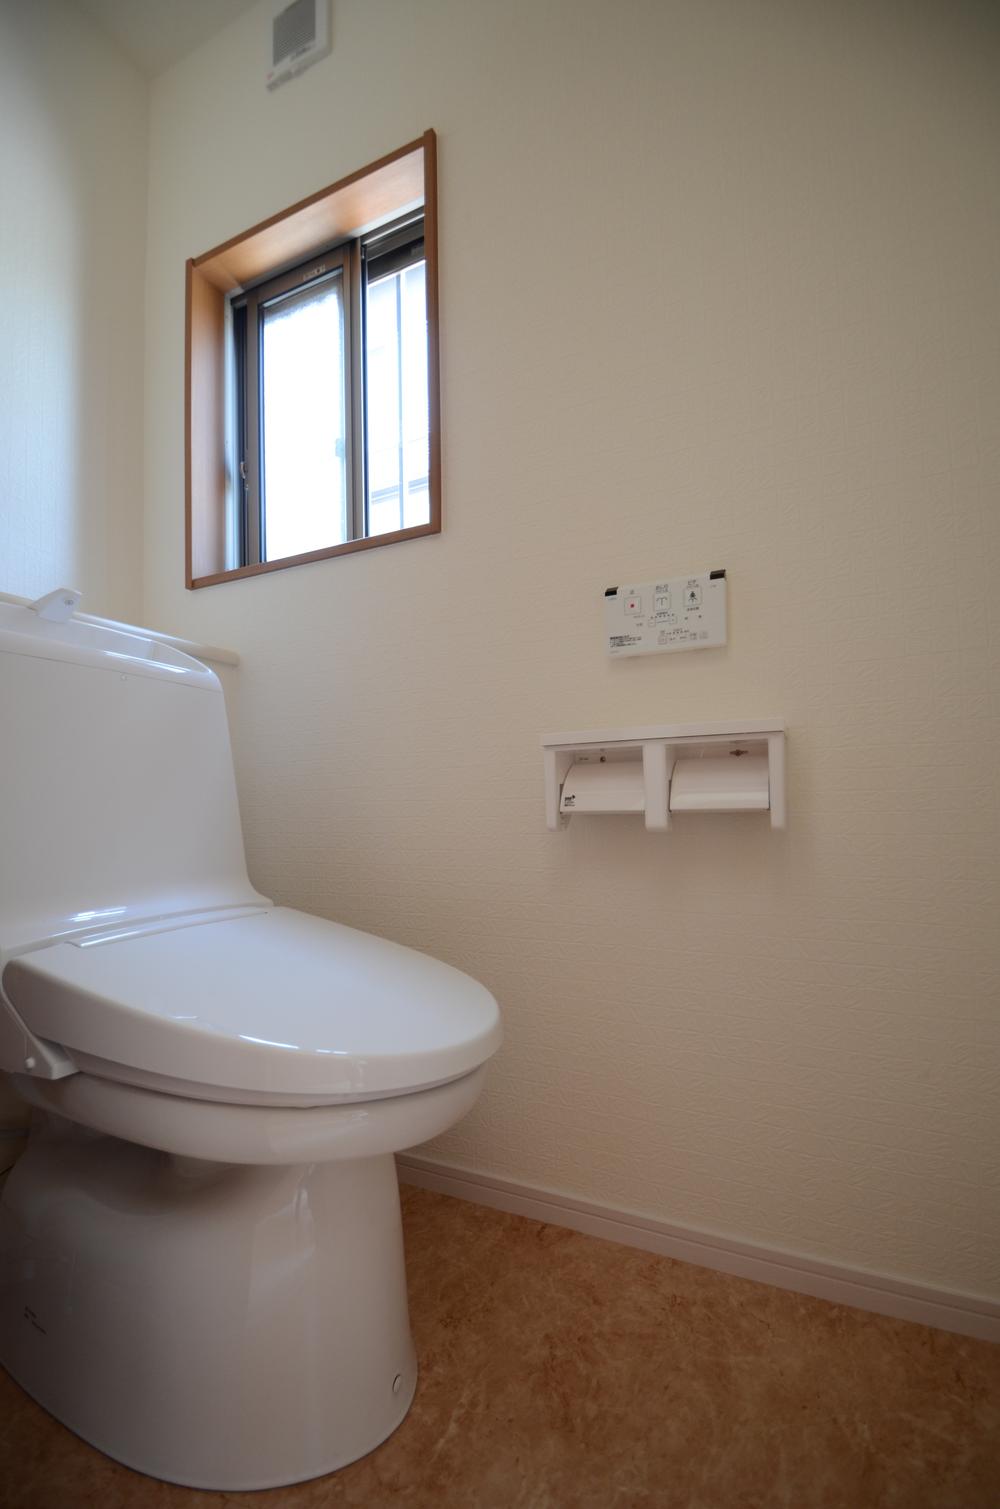 Toilet. Toilet of simple space. You can also enjoy Petit interior in a small window